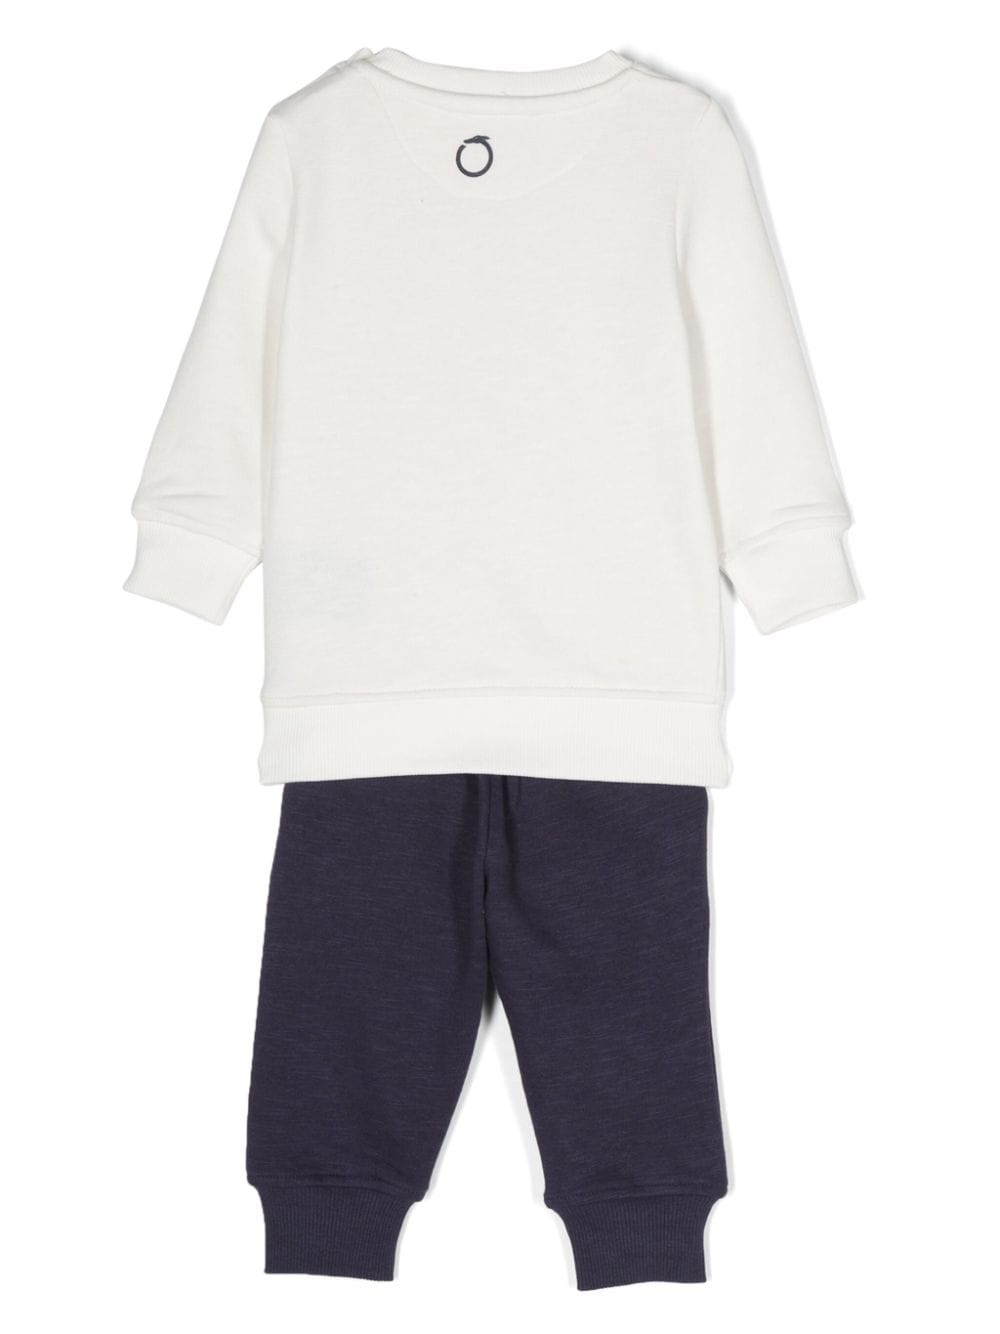 White and blue sports outfit for newborns with logo